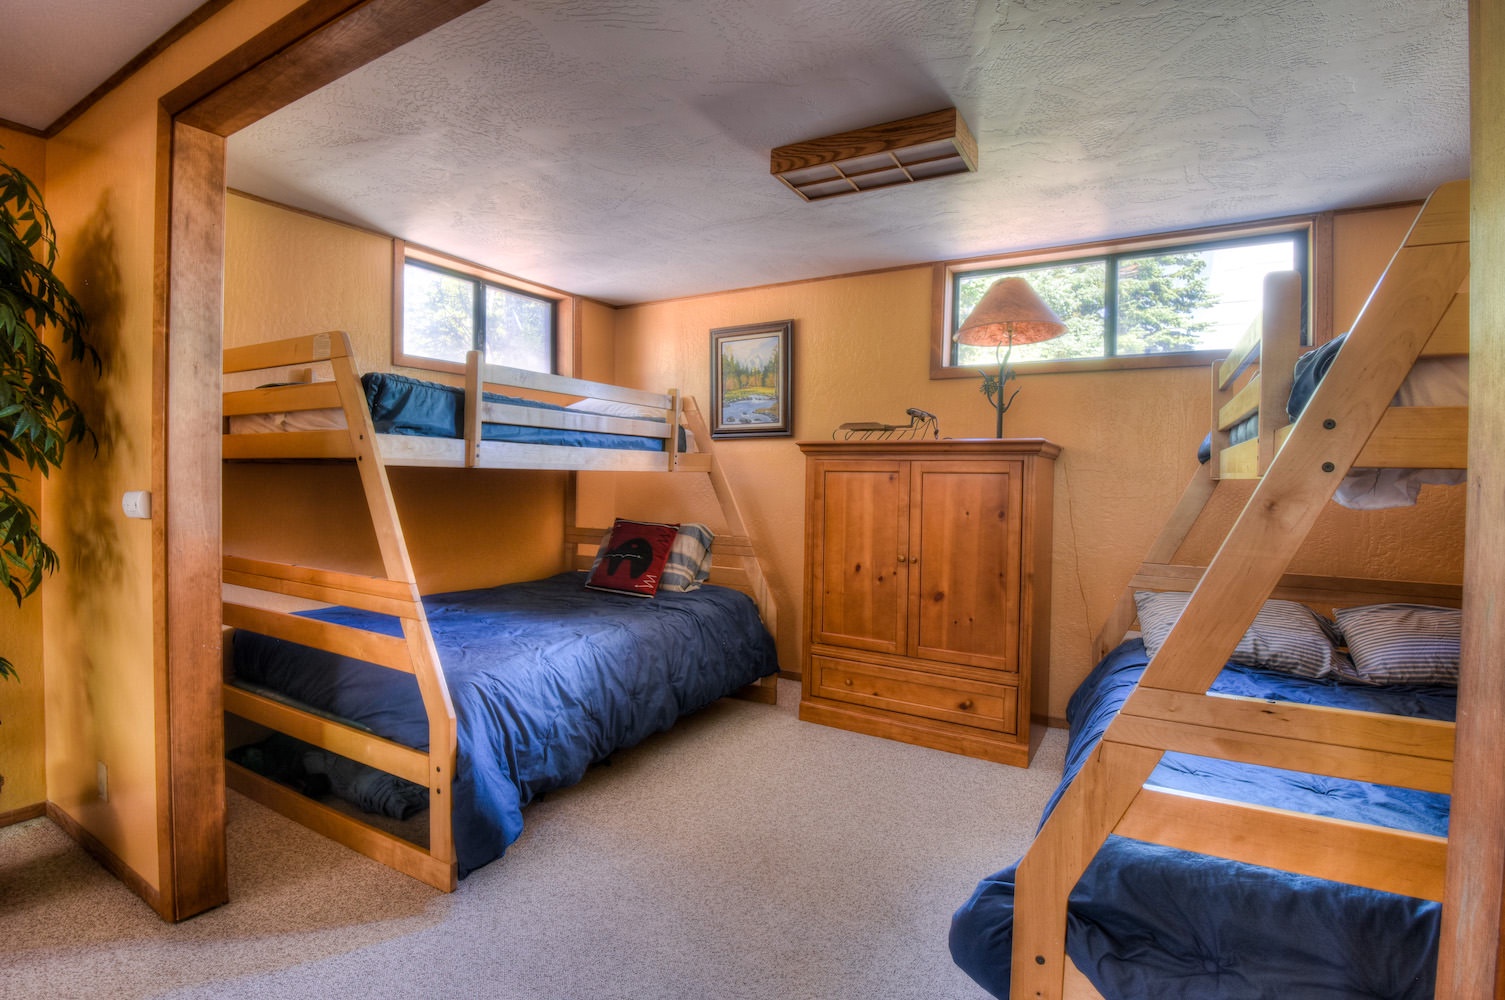 4th bedroom Bunk Room: Twin over Full Bunk Beds